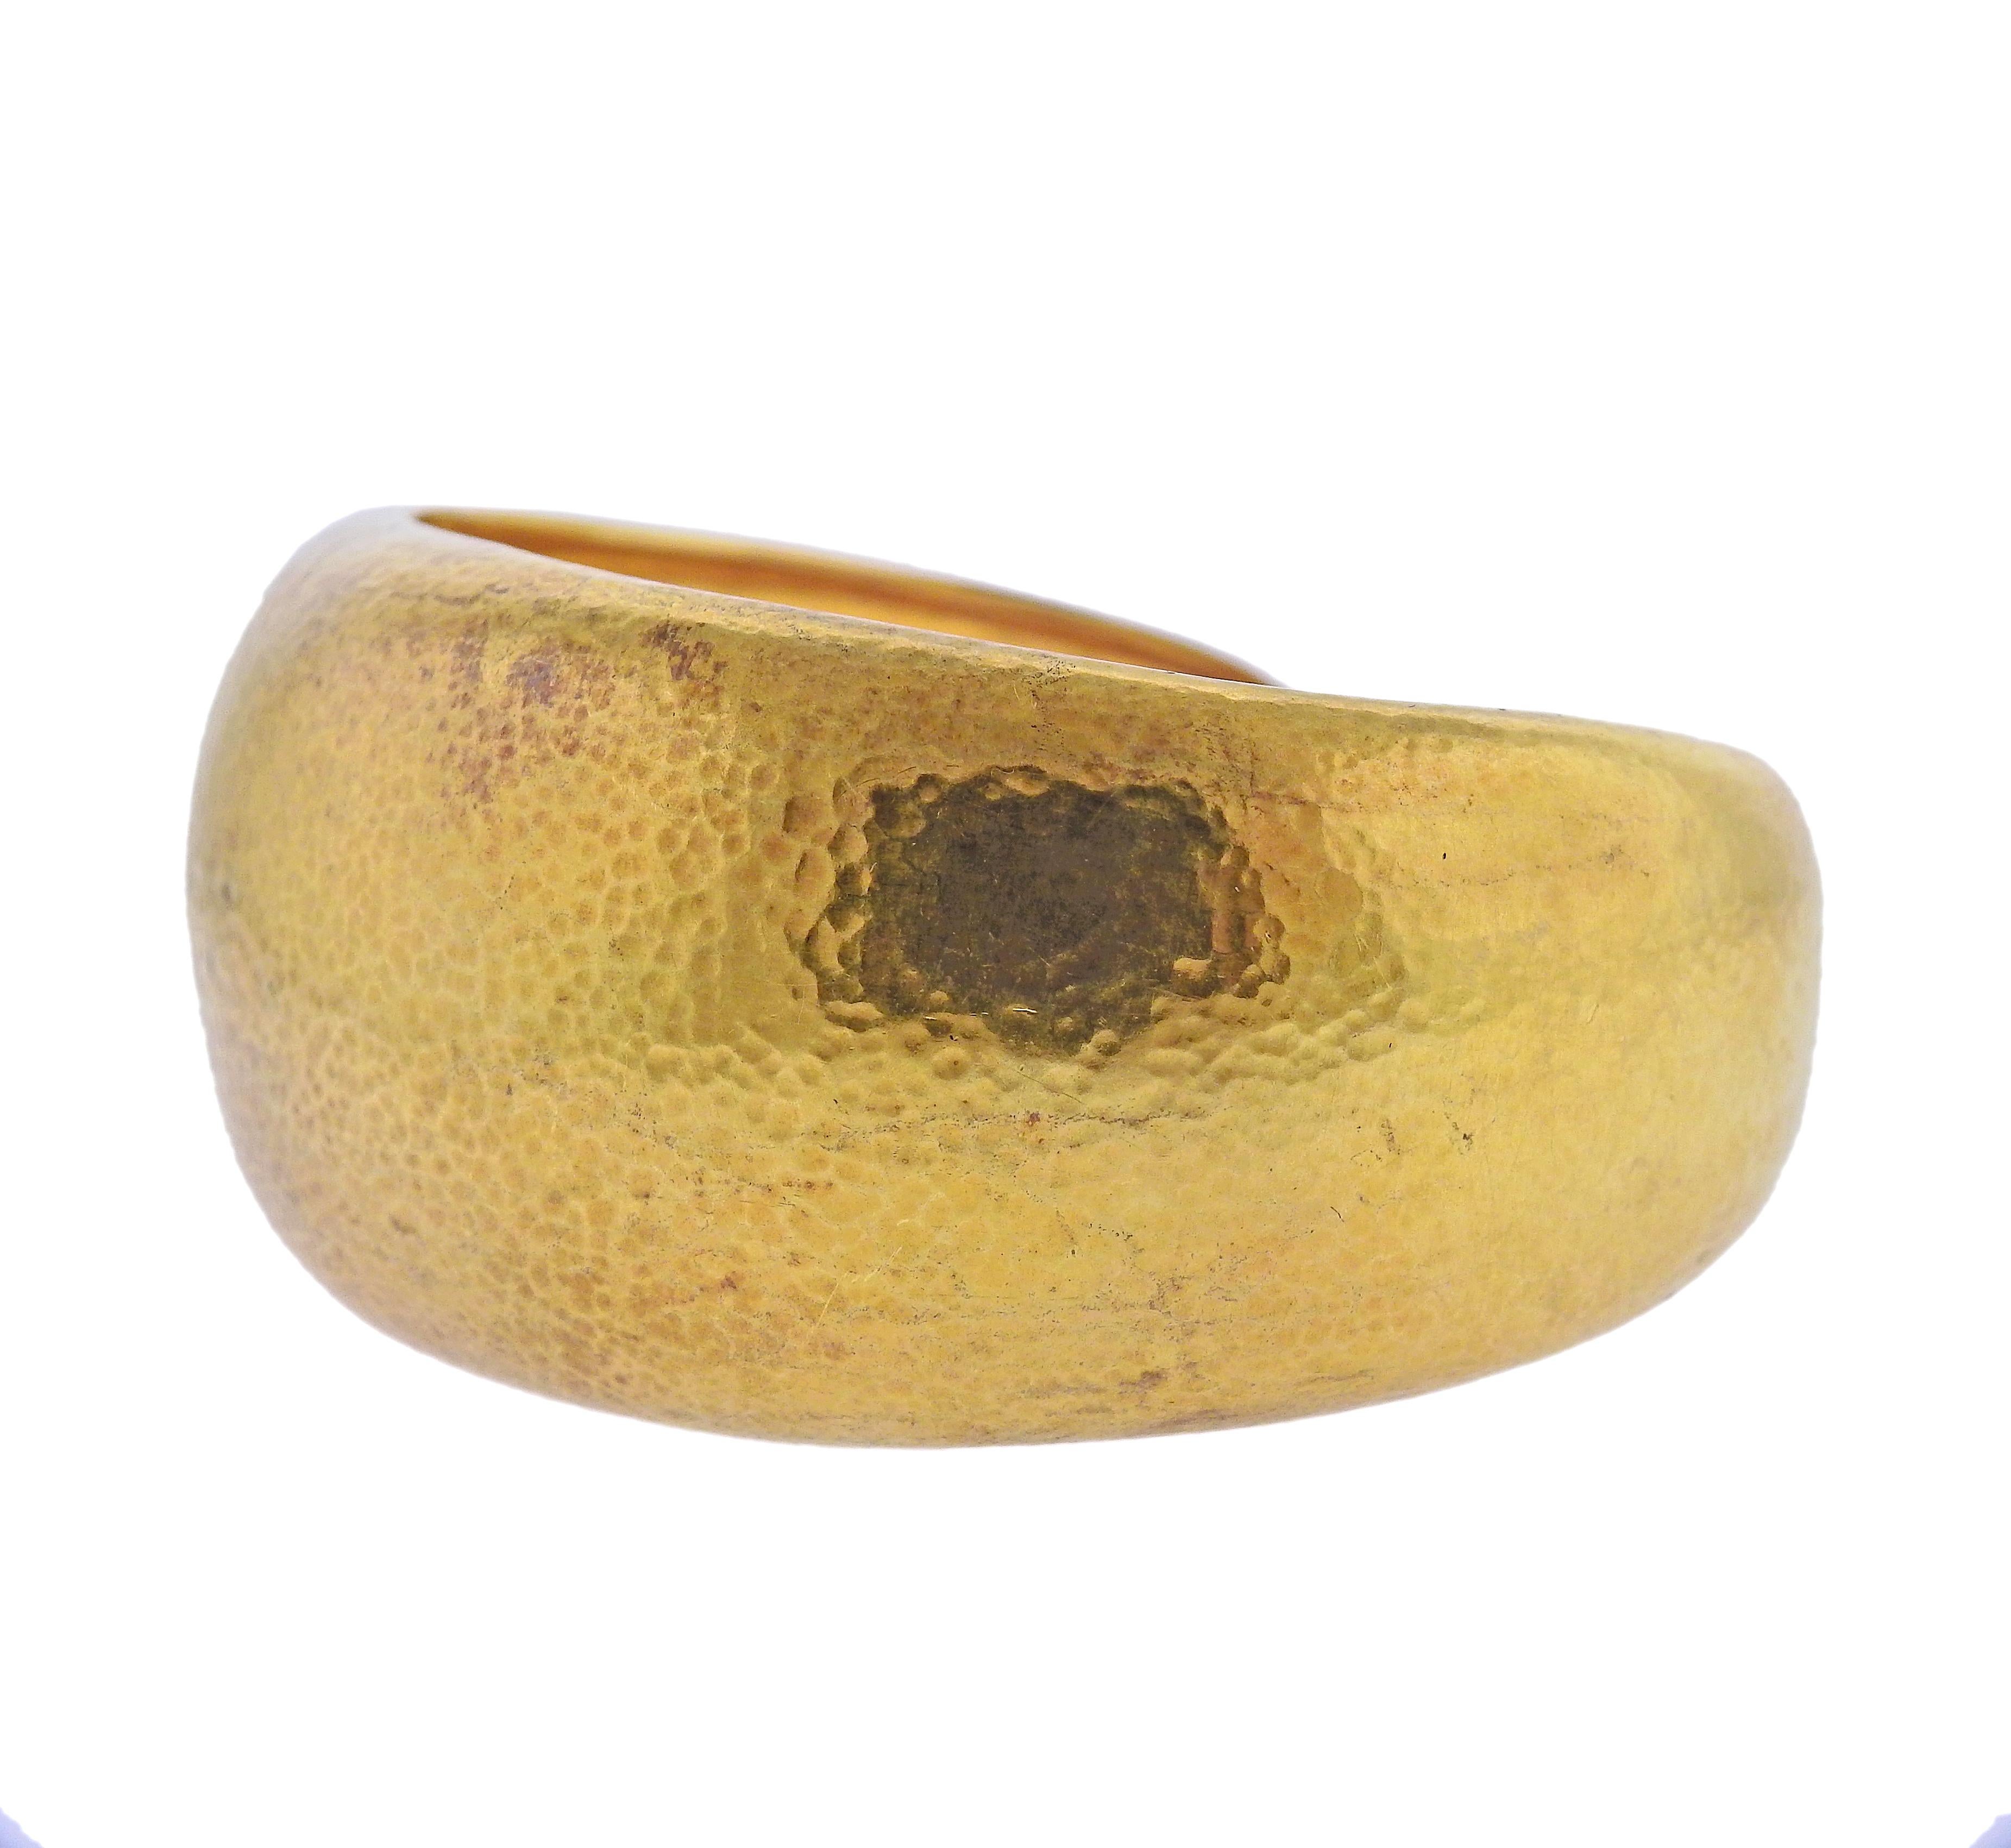 22k hammered finish gold cuff bracelet by Zolotas of Greece. Bracelet will fit approx. 7